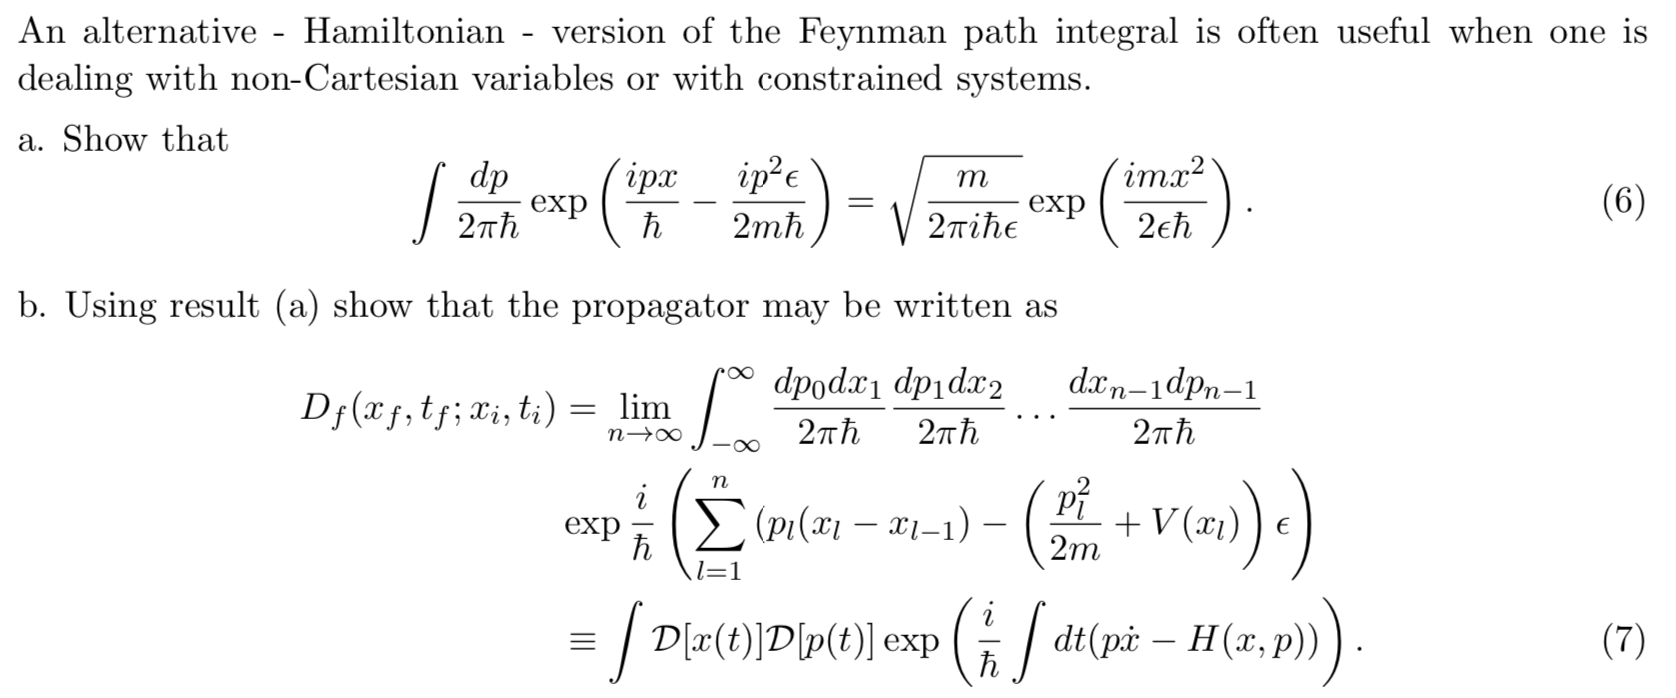 An alternative - Hamiltonian
version of the Feynman path integral is often useful when one is
dealing with non-Cartesian variables or with constrained systems
a. Show that
imx2
dp
exp
2пh
iрх
S
m
(6)
exp
27Tihe
2eh
2mh
b. Using result (a) show that the propagator may be written as
dx n-1dpn-1
dpod dpidax2
Dj (xf,t;Xi, ti)
= lim
n o
27Th
2тћ
2πh
(PI( -
V(x)E
2m
exp
h
l=1
dtpHa,p)
ED(t)Dp(t)] exp
(7)
h
